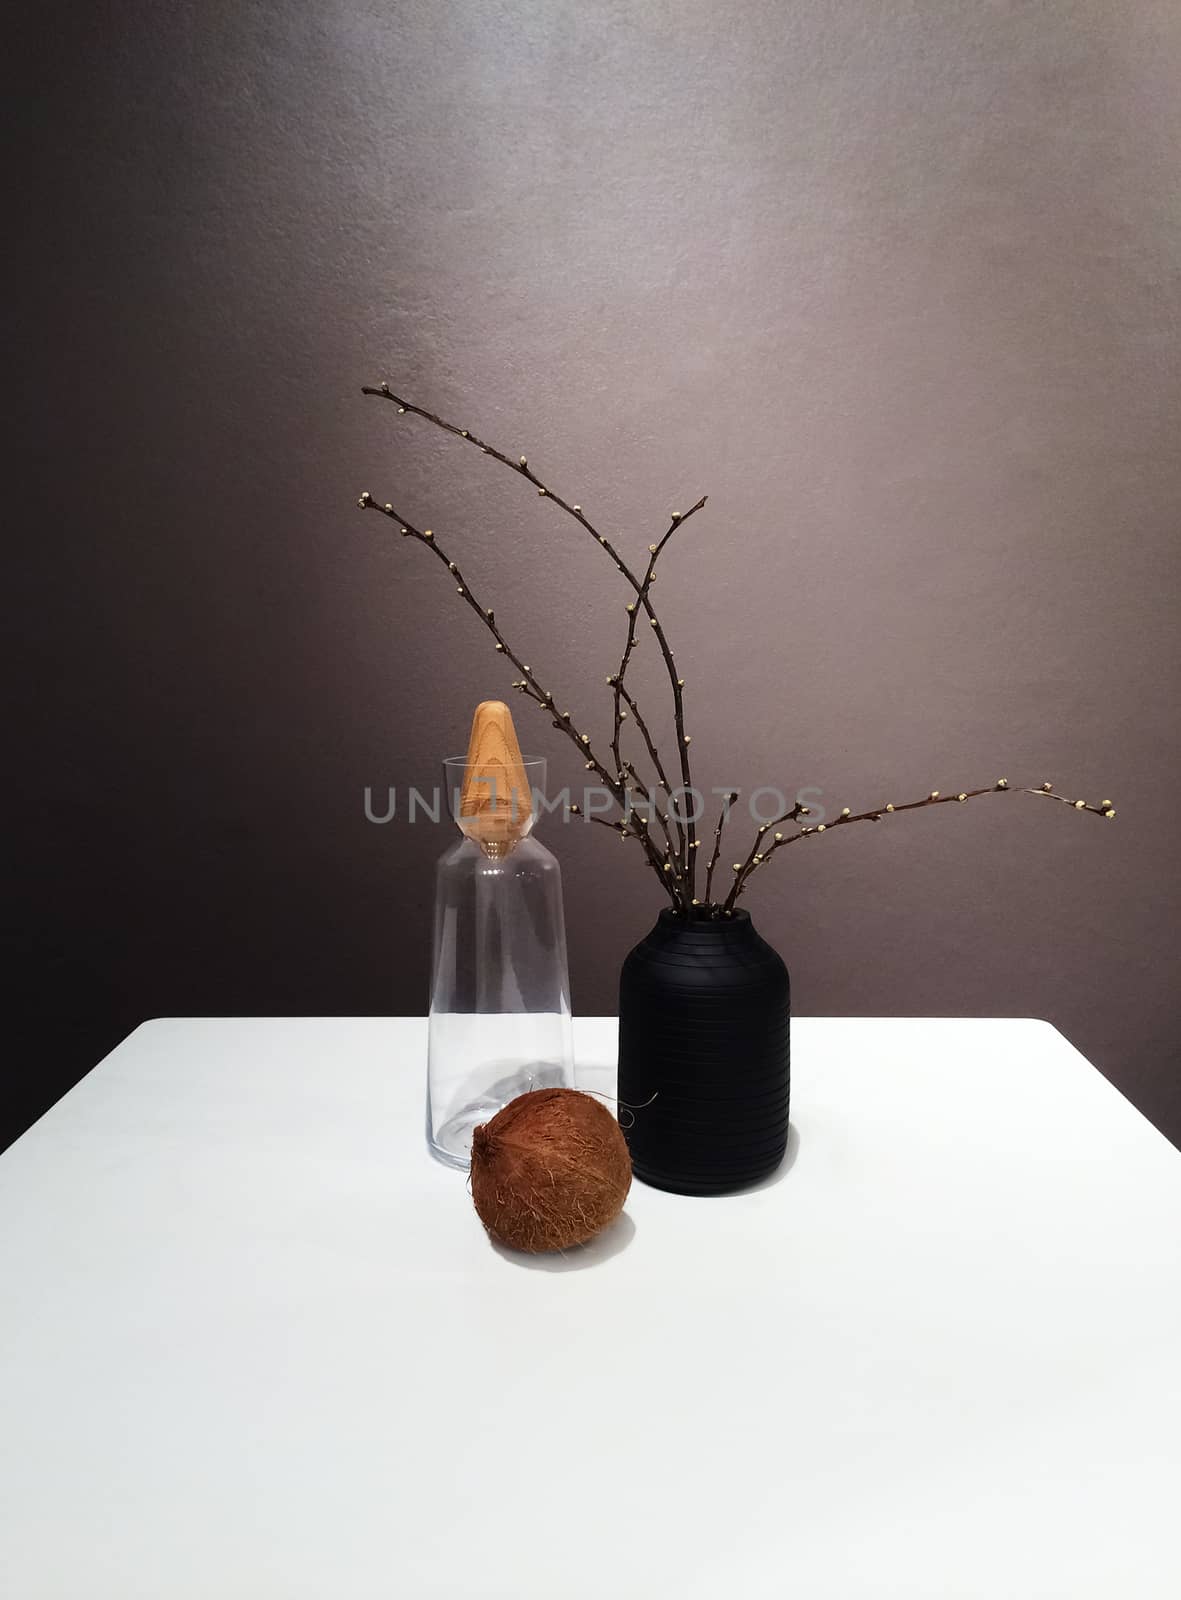 Vase with tree branches and decorative objects on the table.